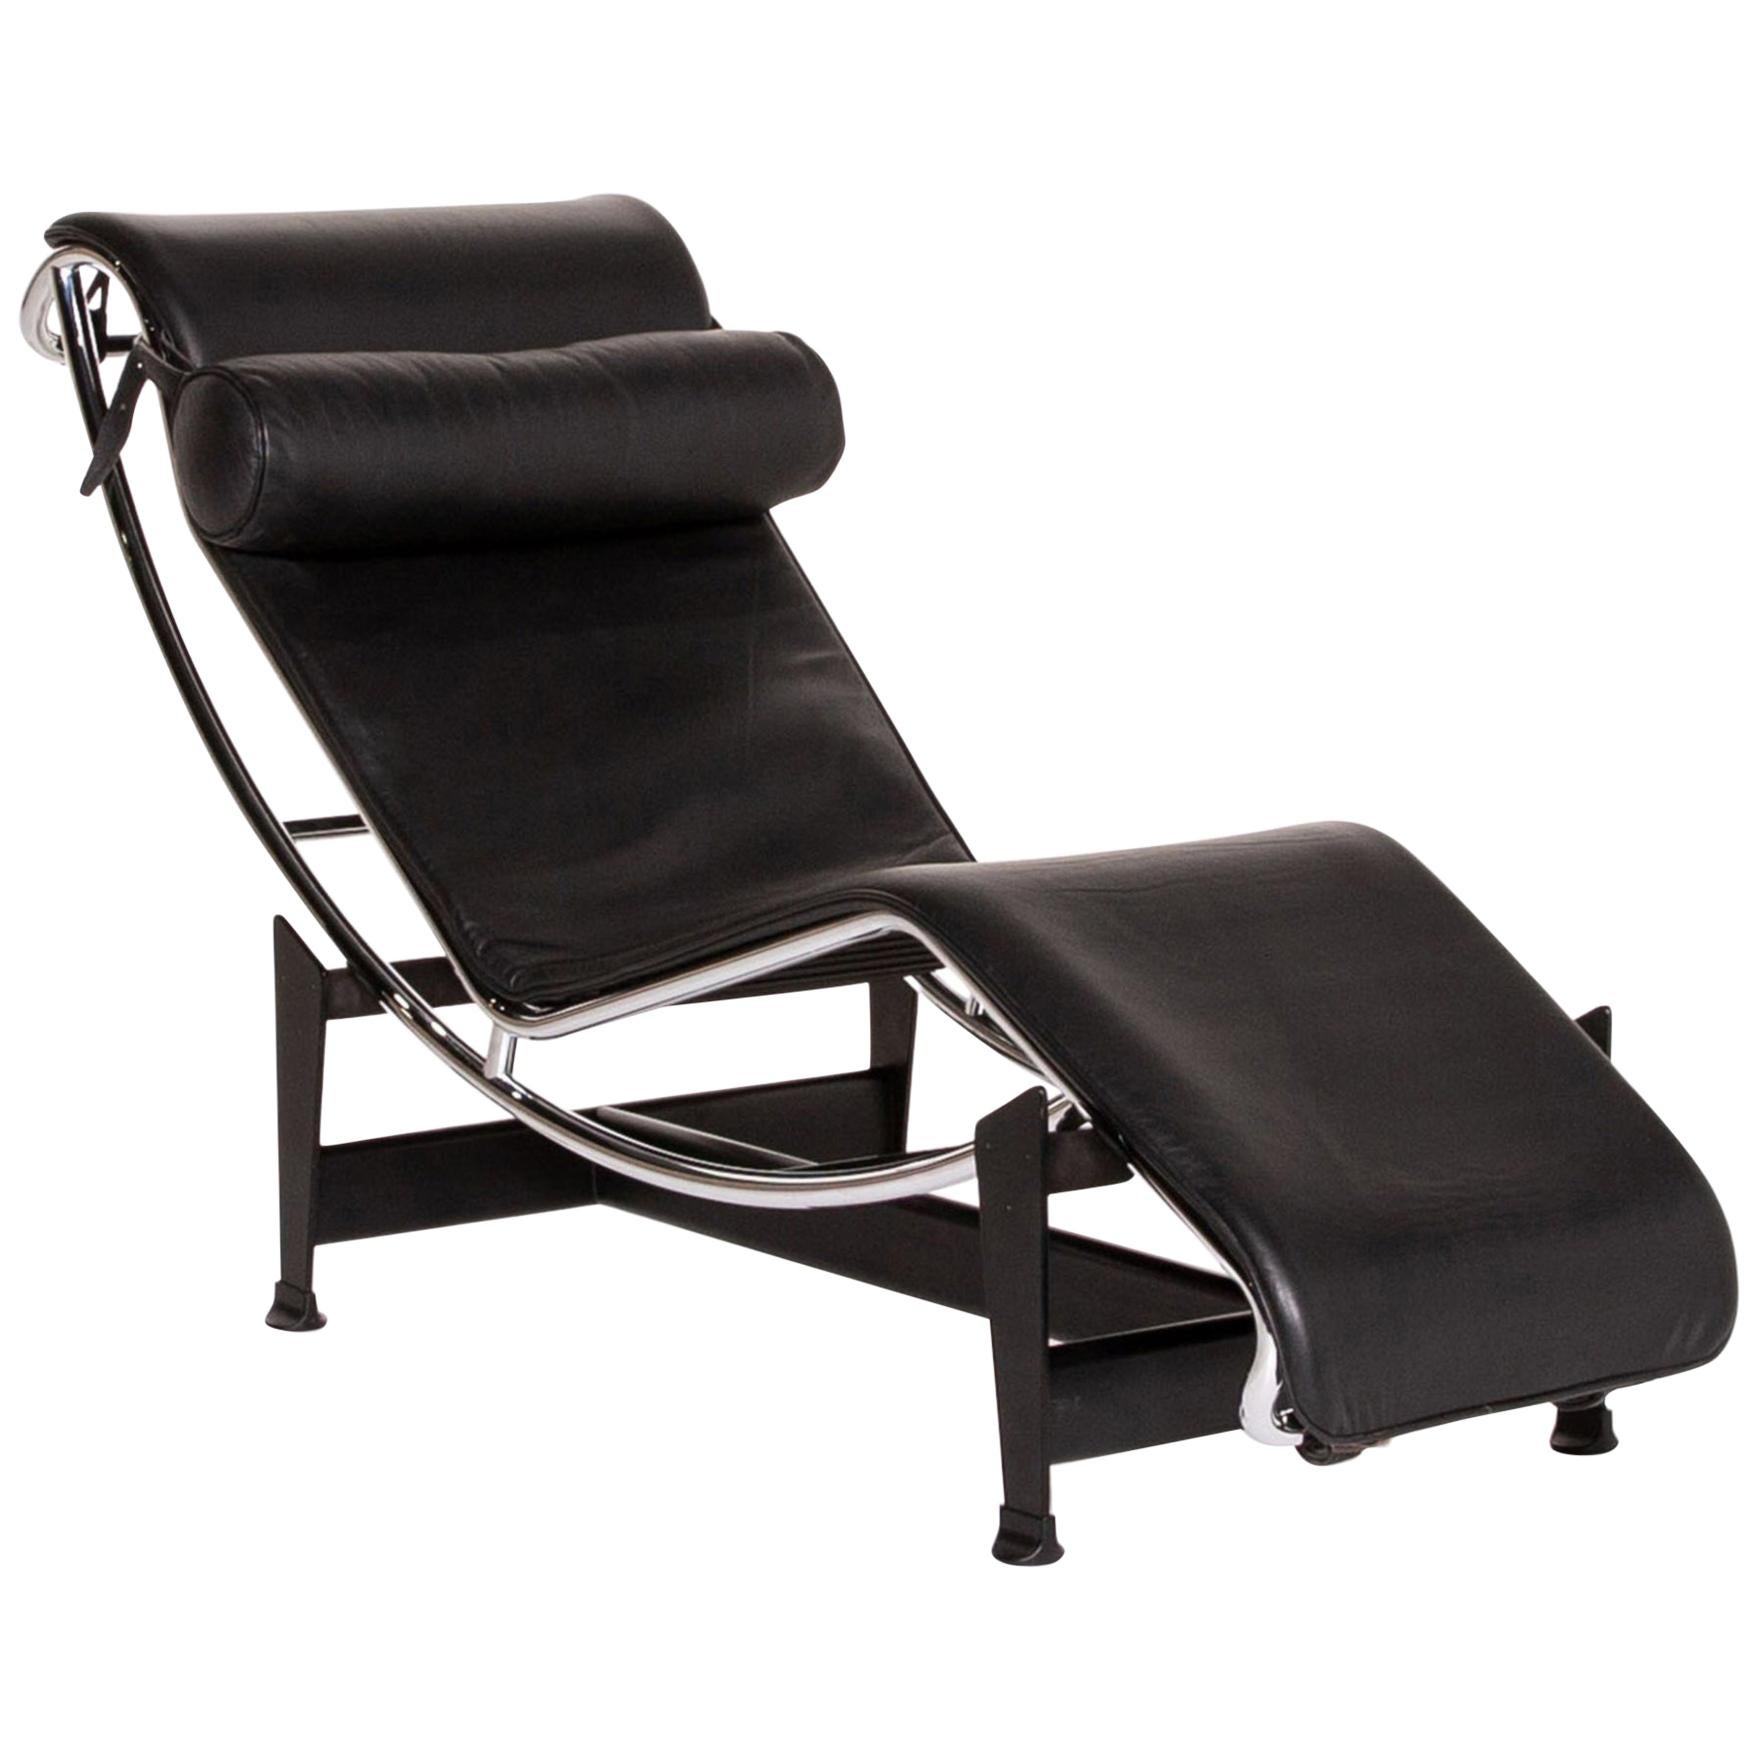 Cassina Le Corbusier LC 4 Leather Lounger Black Function Relaxation Function For Sale